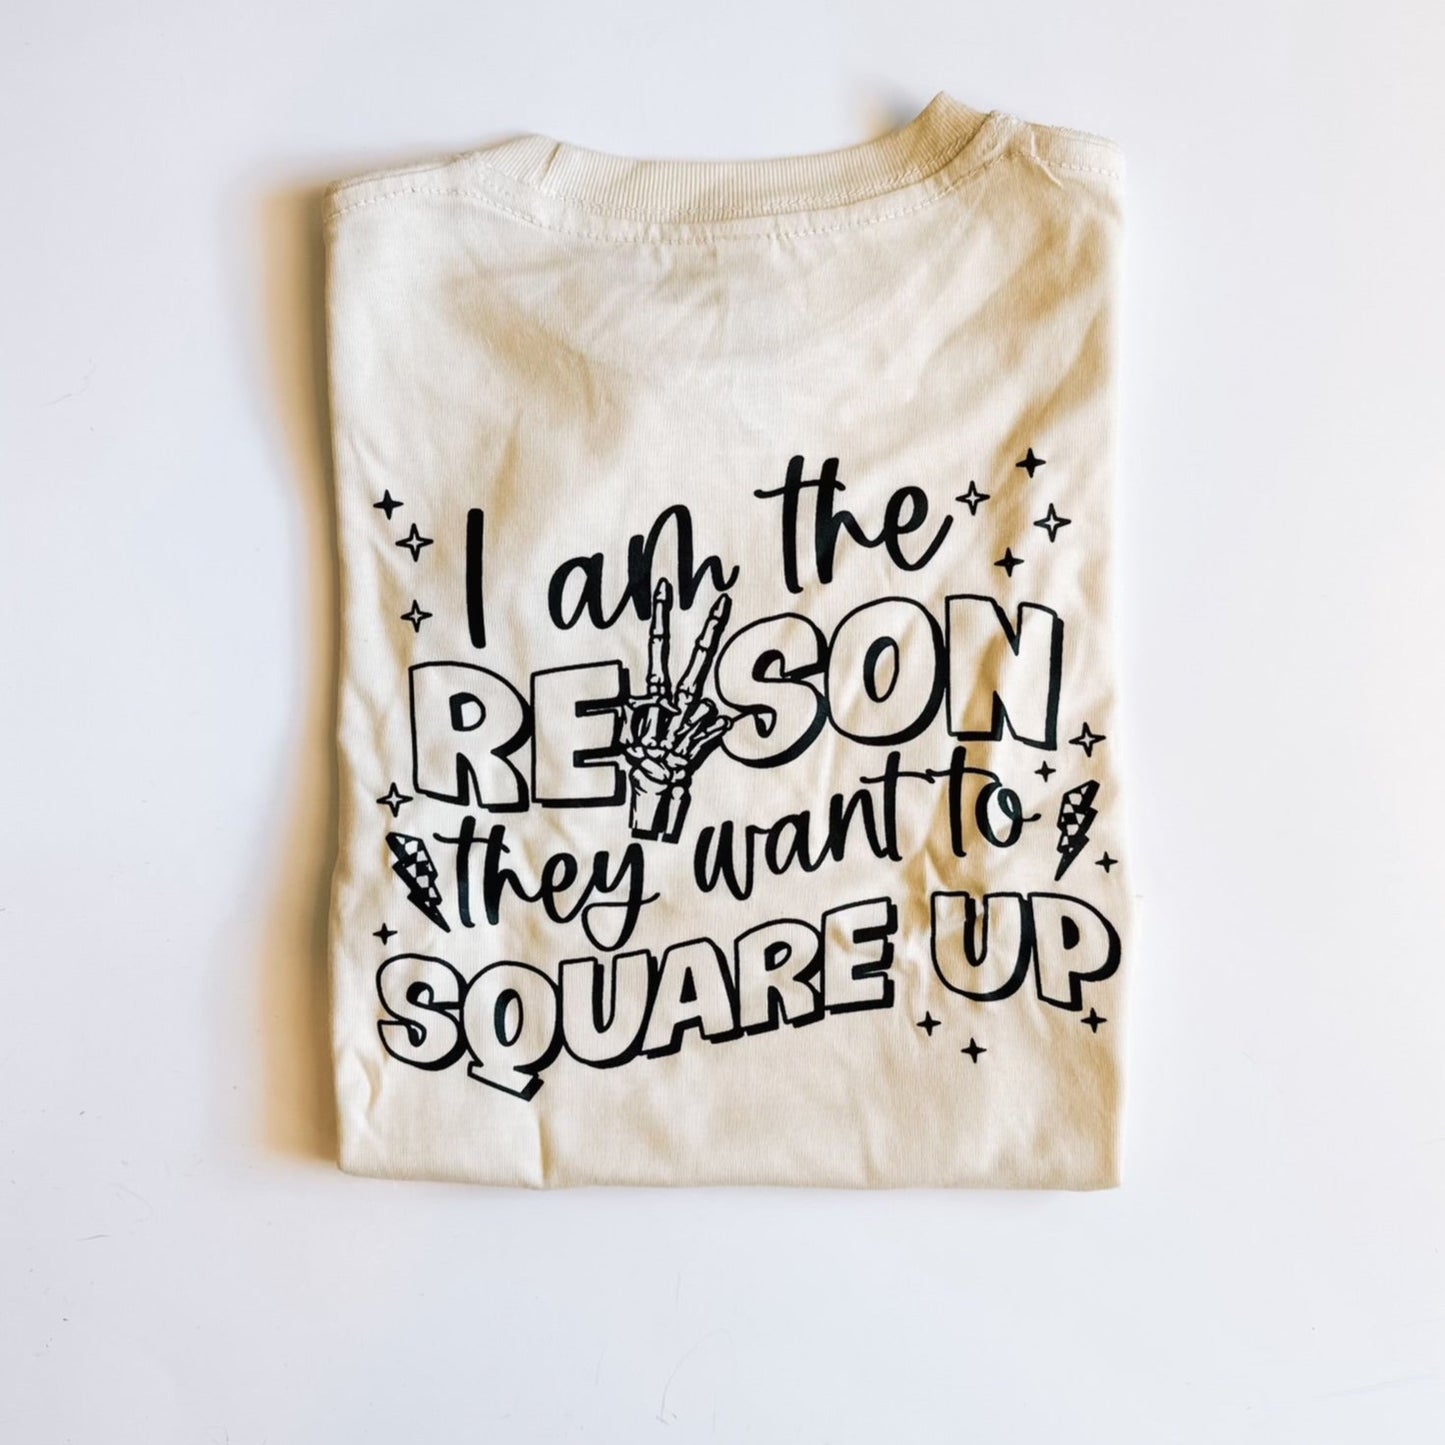 Square Up | Oatmeal Graphic T-shirt